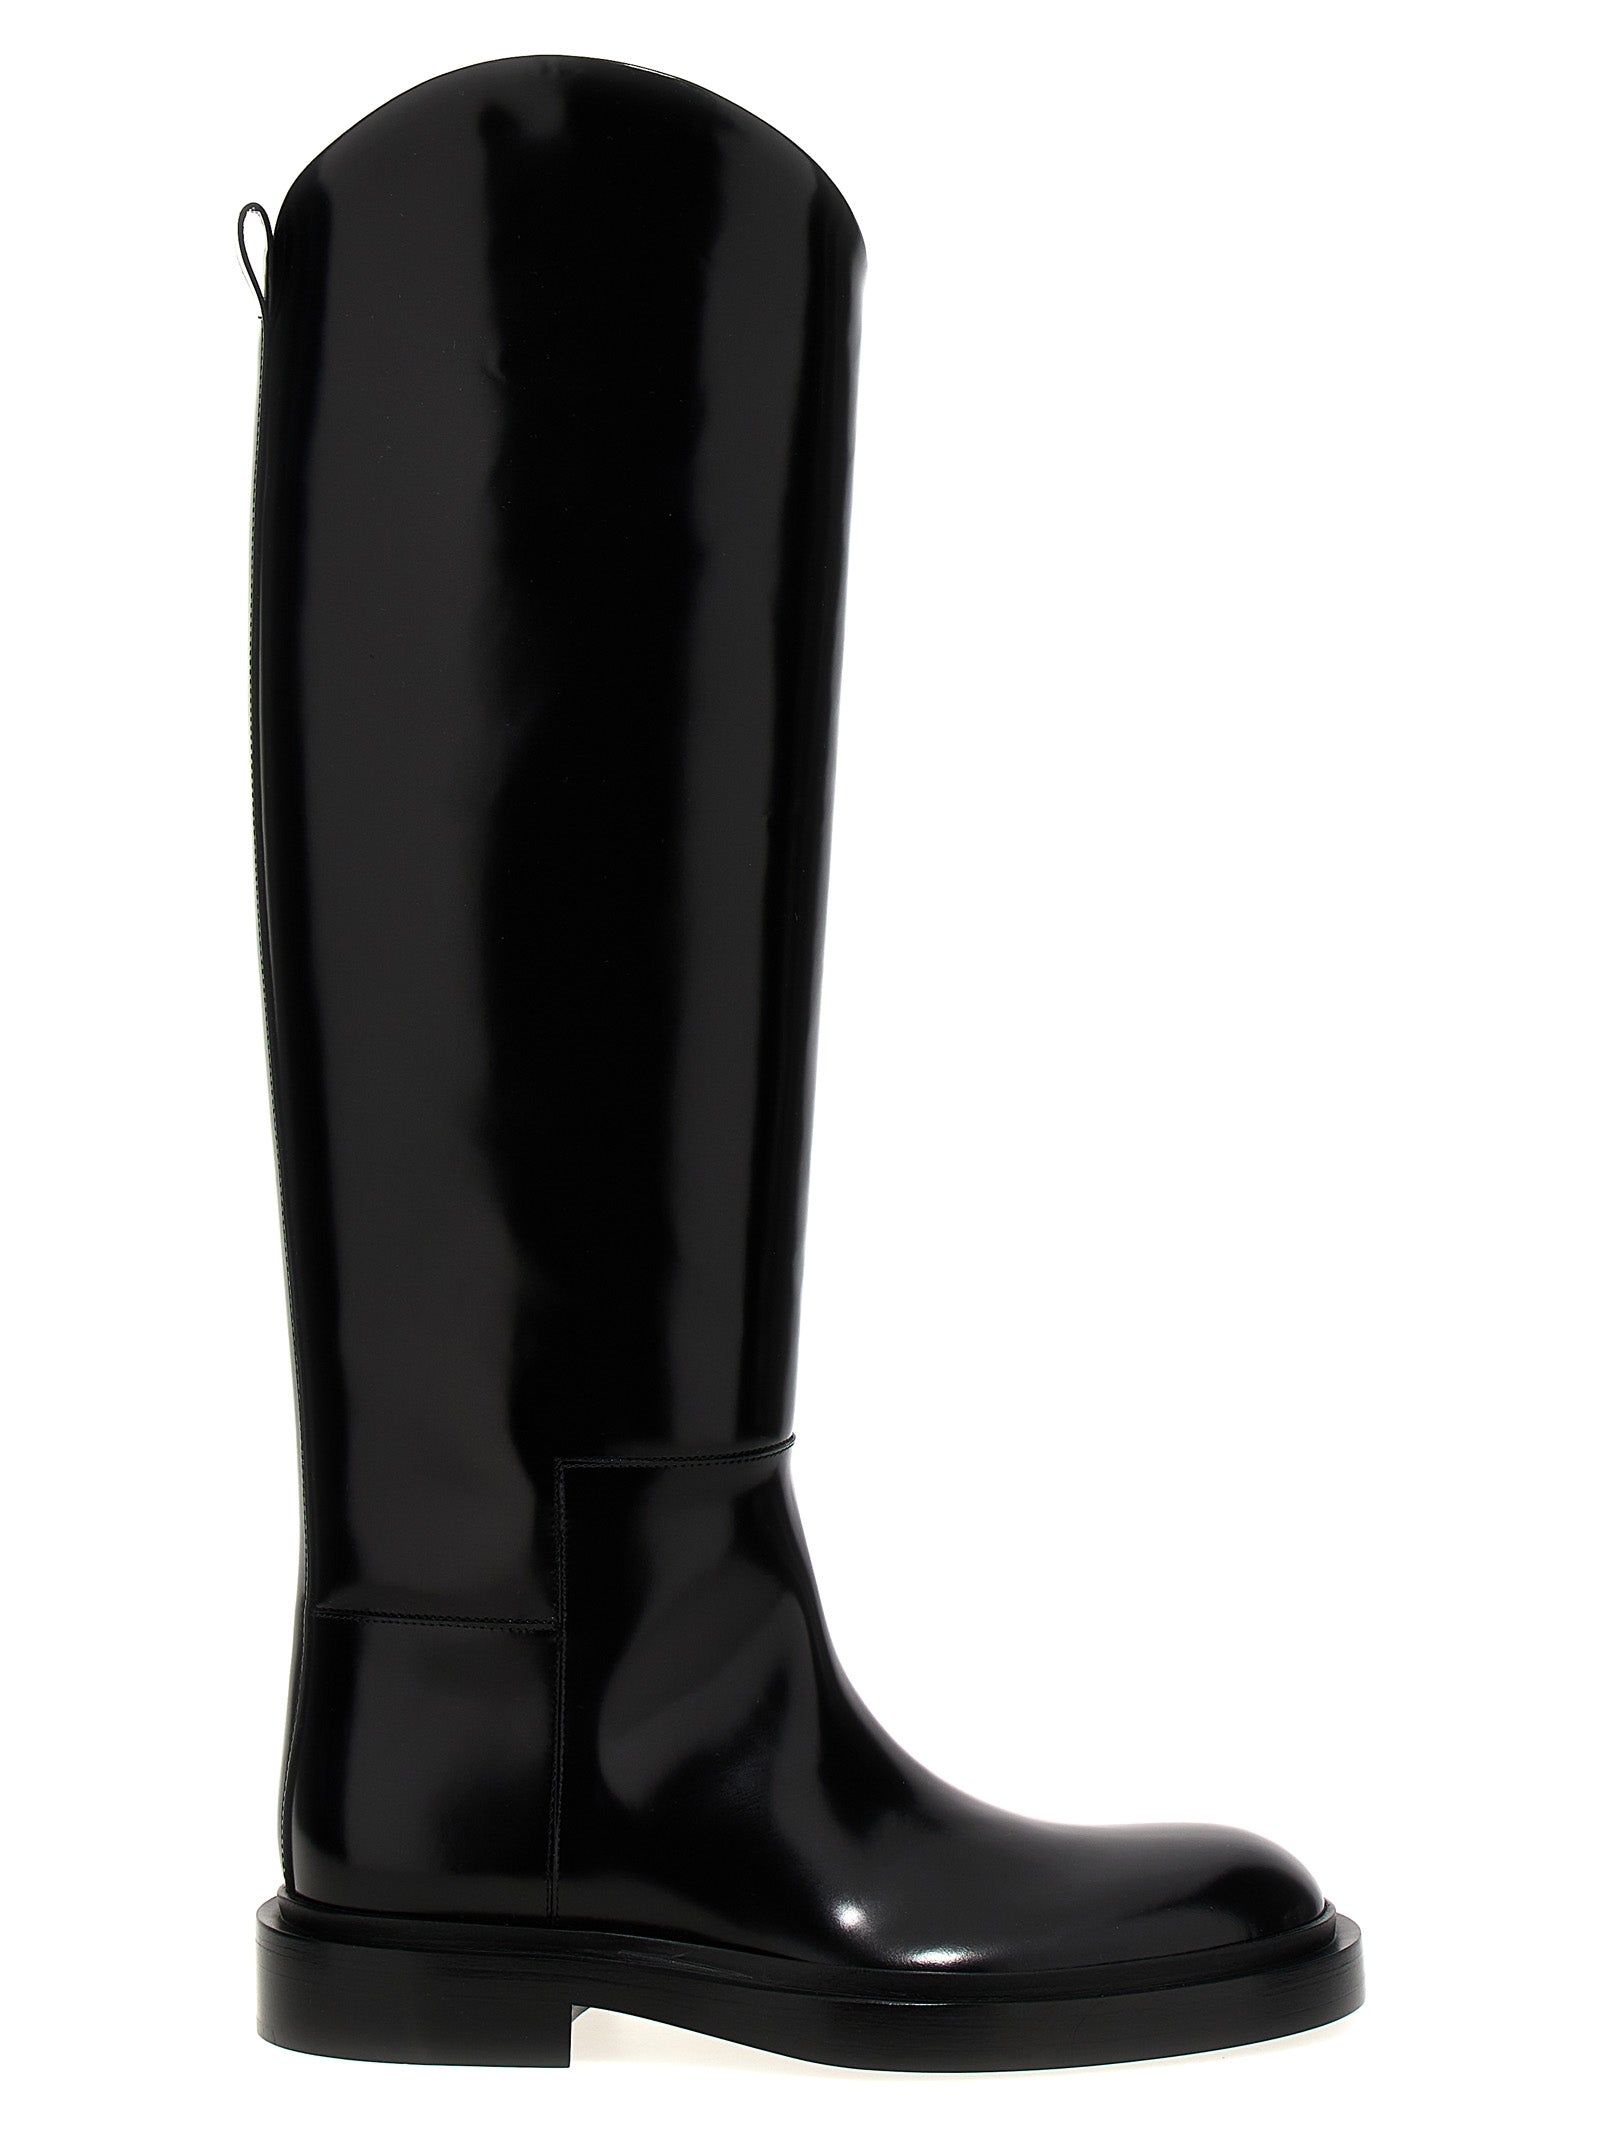 Jil Sander Leather Boots Boots, Ankle Boots Black